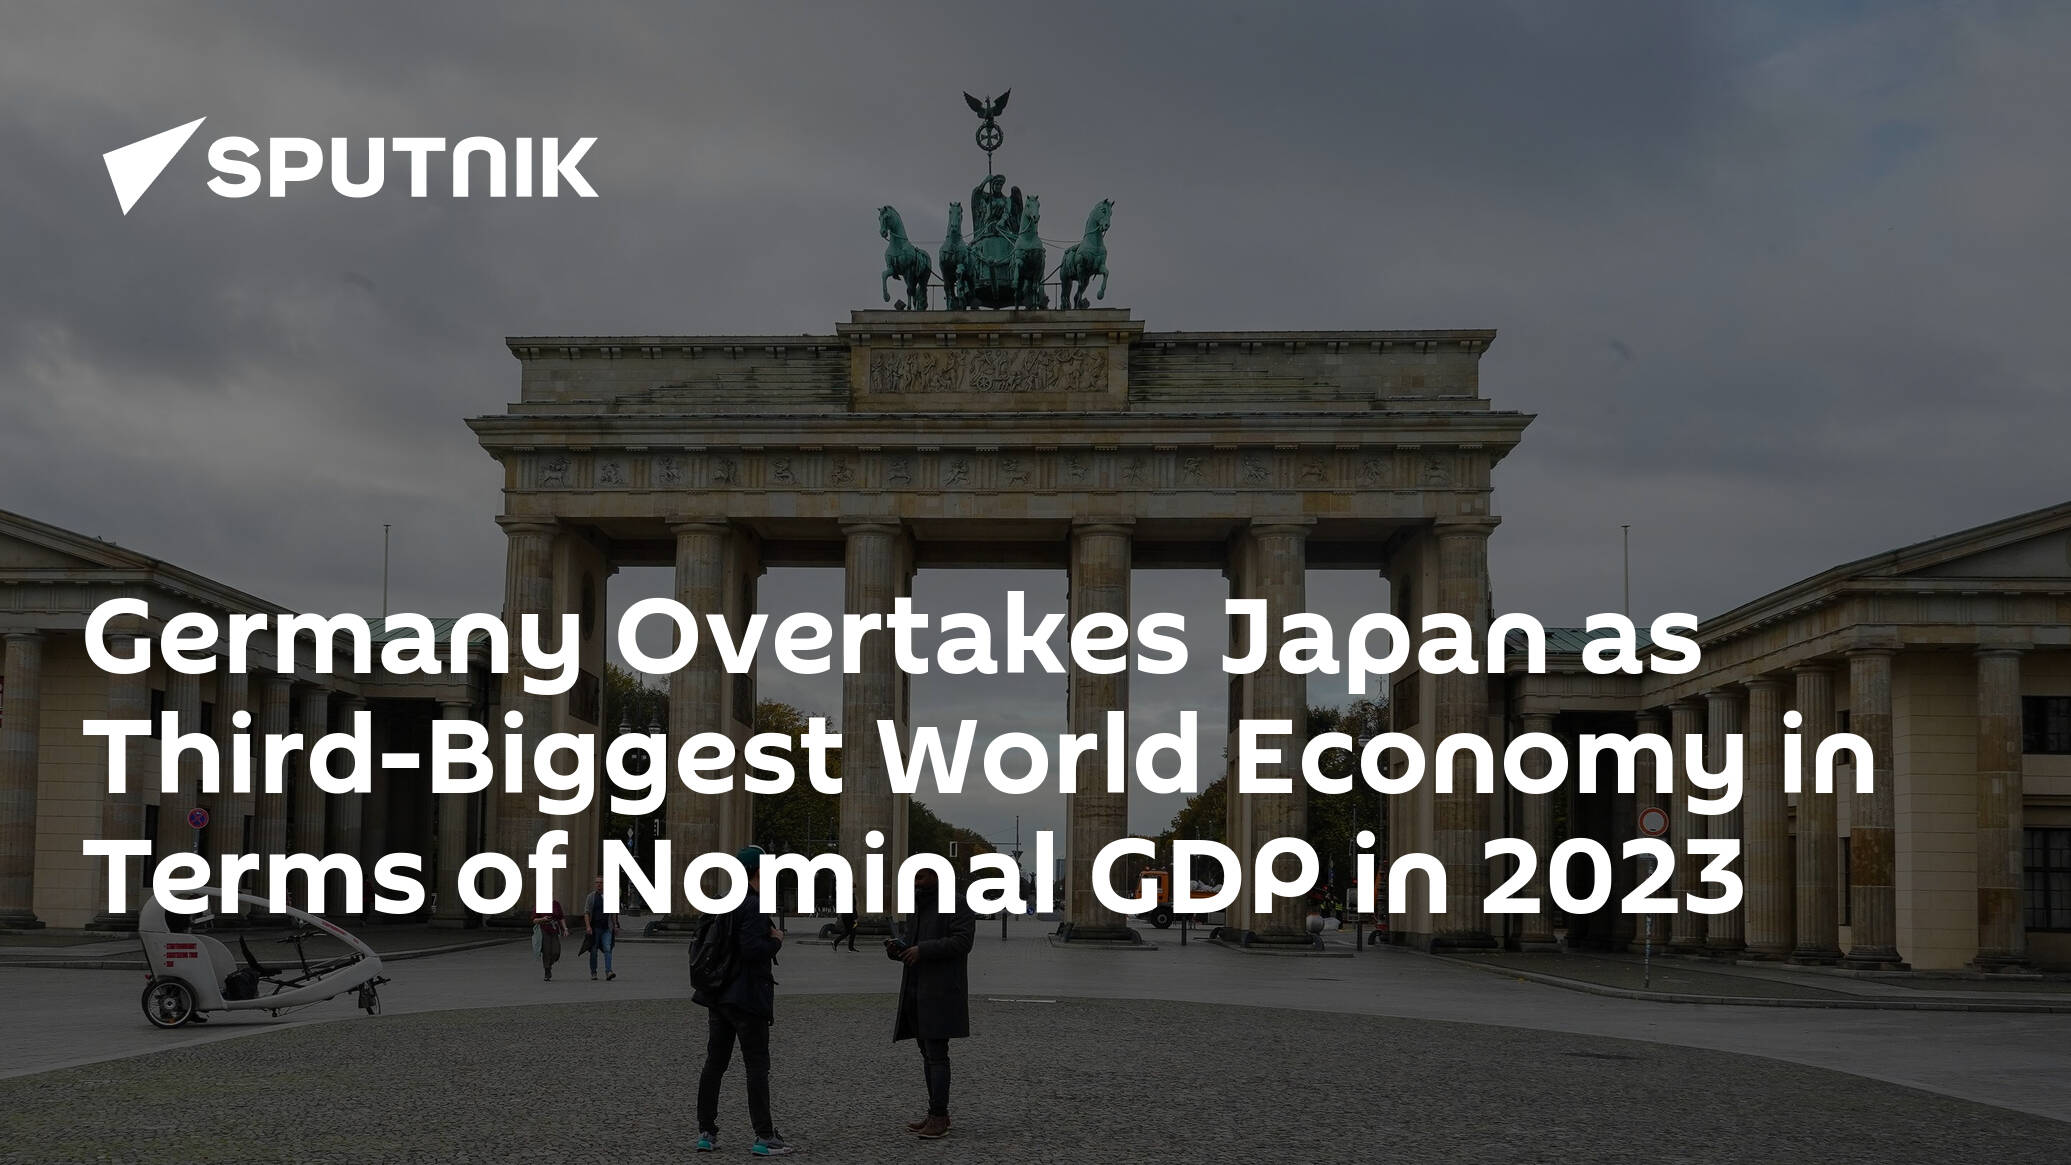 Germany Overtakes Japan as Third-Biggest World Economy in Terms of Nominal GDP in 2023